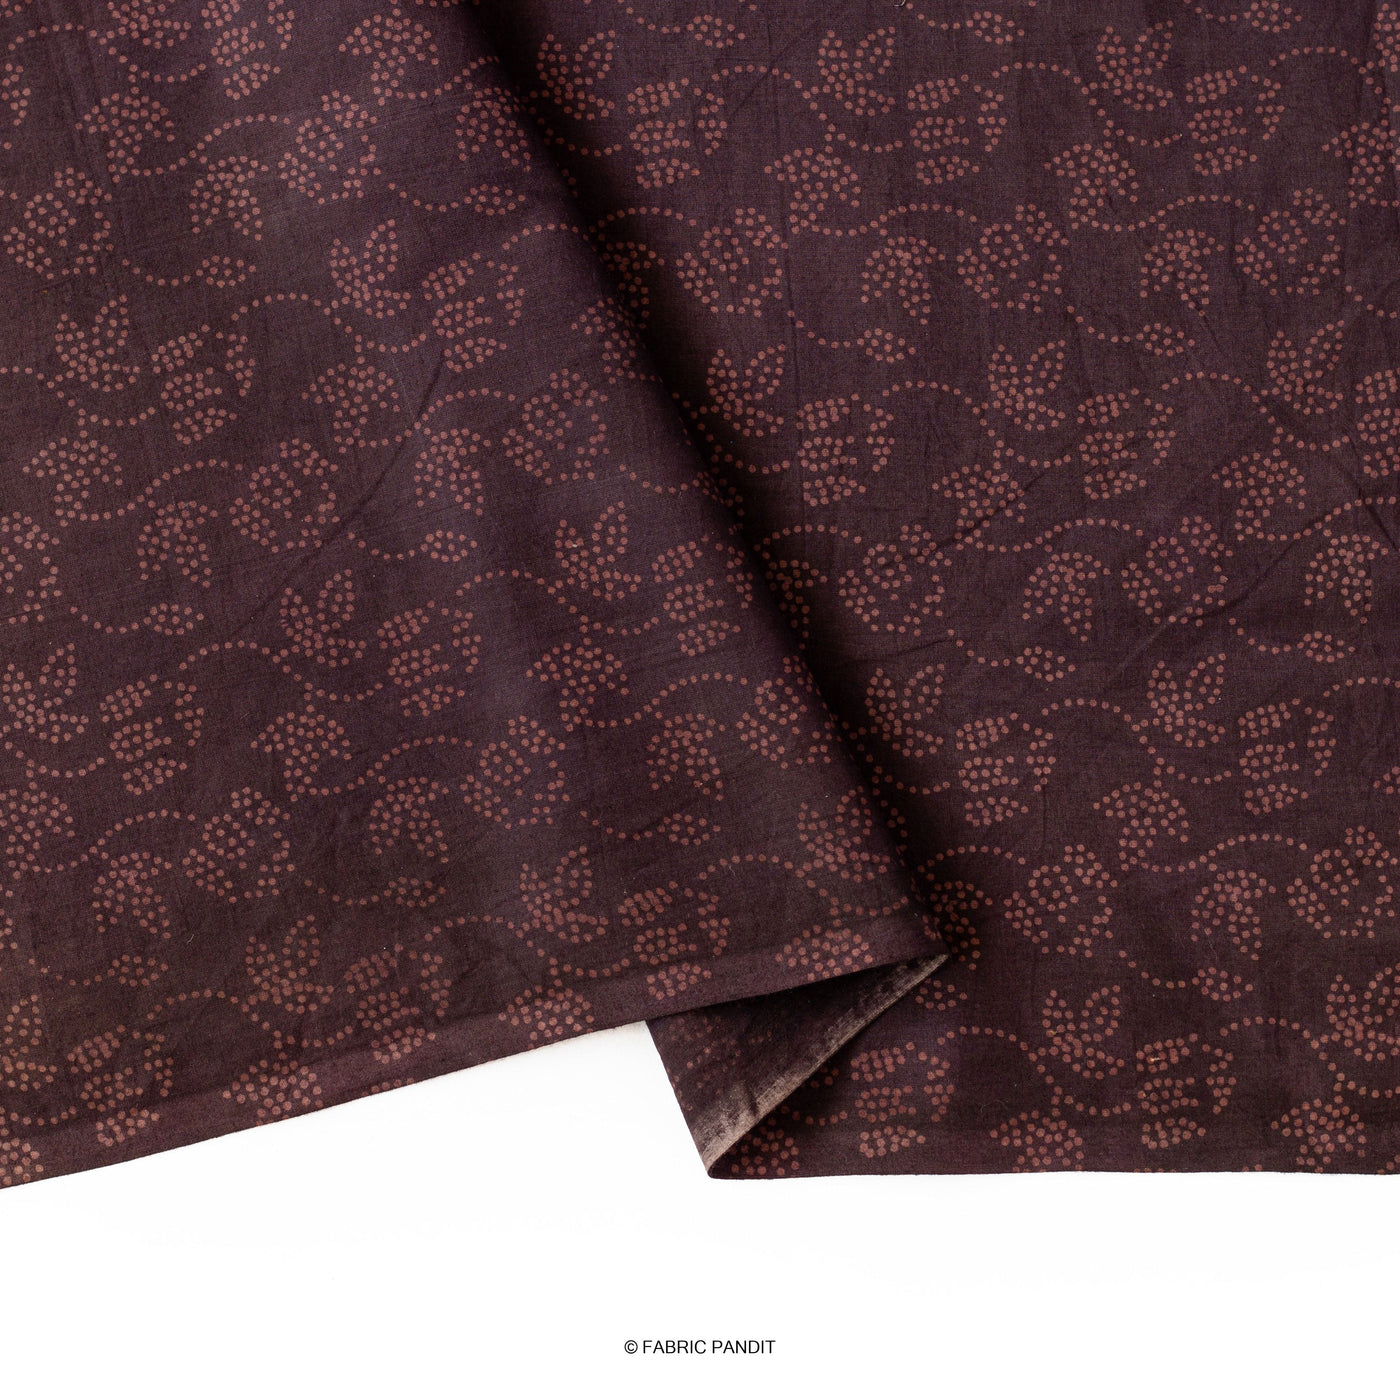 Fabric Pandit Fabric Dusty Brown Bandhani Floral Vines Discharge Print Pure Cotton Fabric (Width 45 Inches)